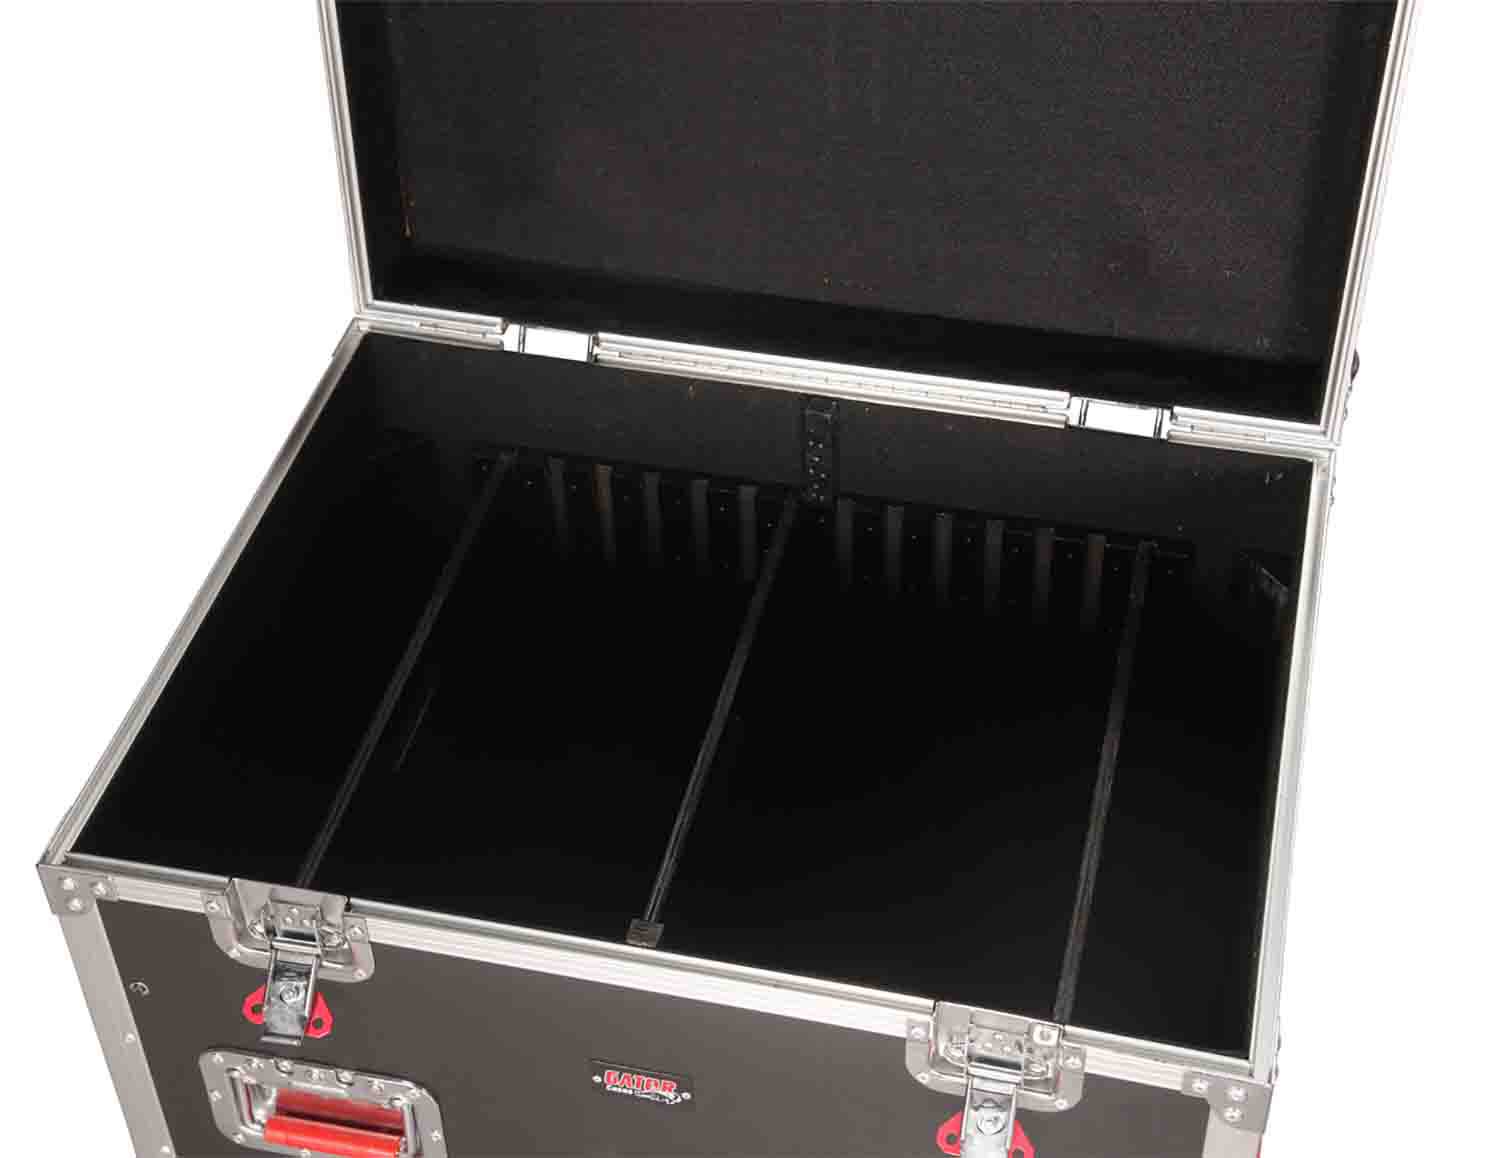 Gator Cases G-TOURTRK302212 Truck Pack Trunk Case with Dividers - Hollywood DJ